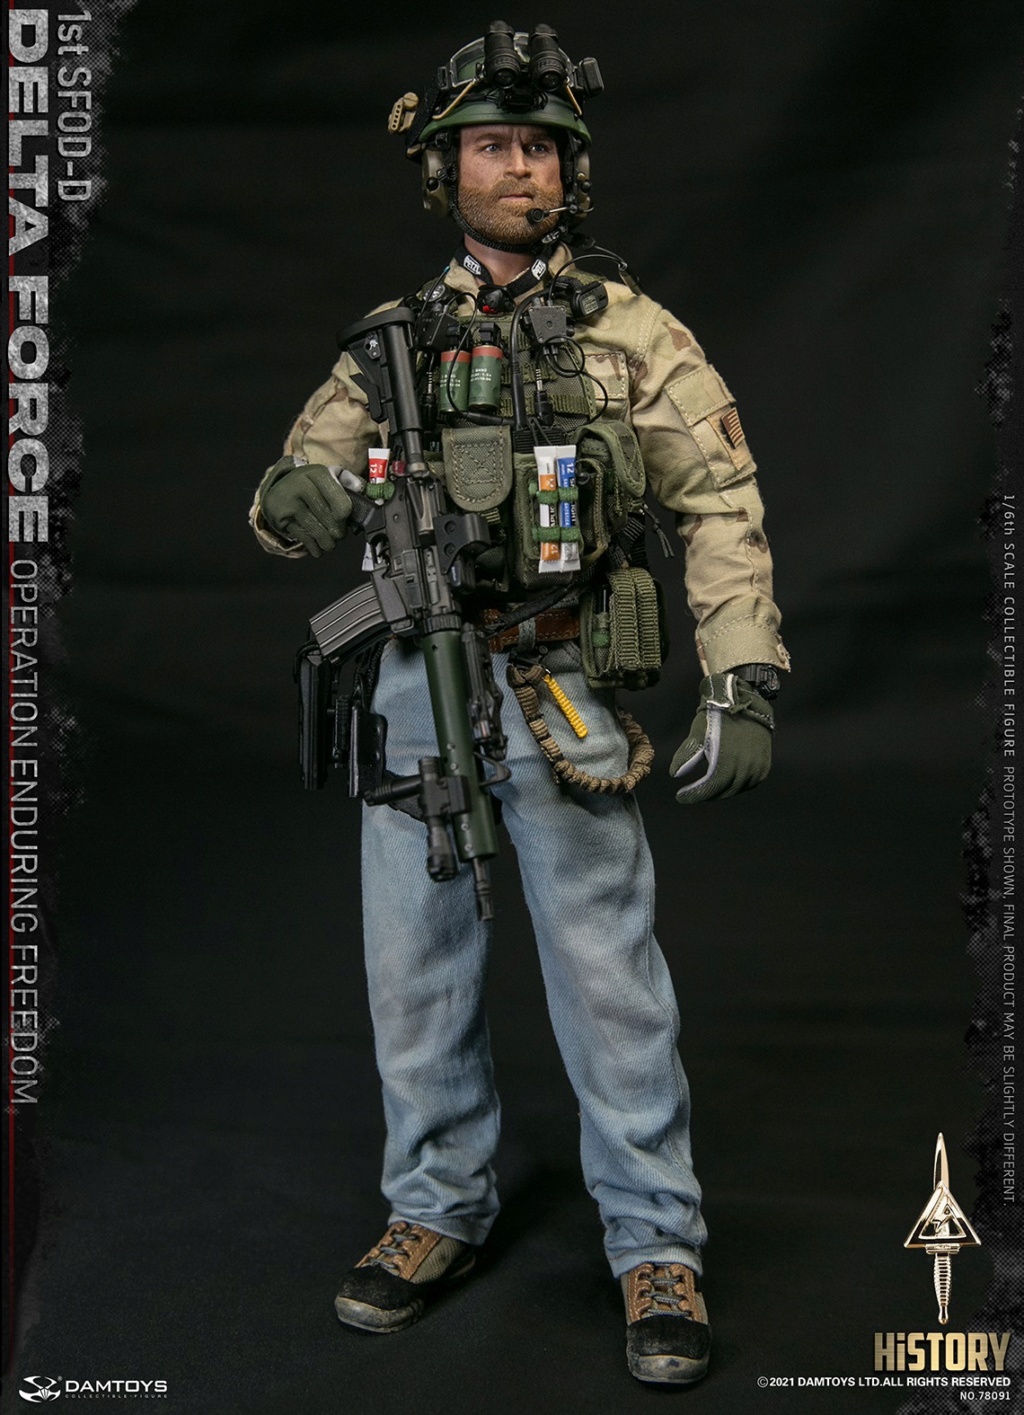 DeltaForces - NEW PRODUCT: DAMTOYS: 1/6 Delta Forces 1st SFOD-D Operation Enduring Freedom #78091 10520910